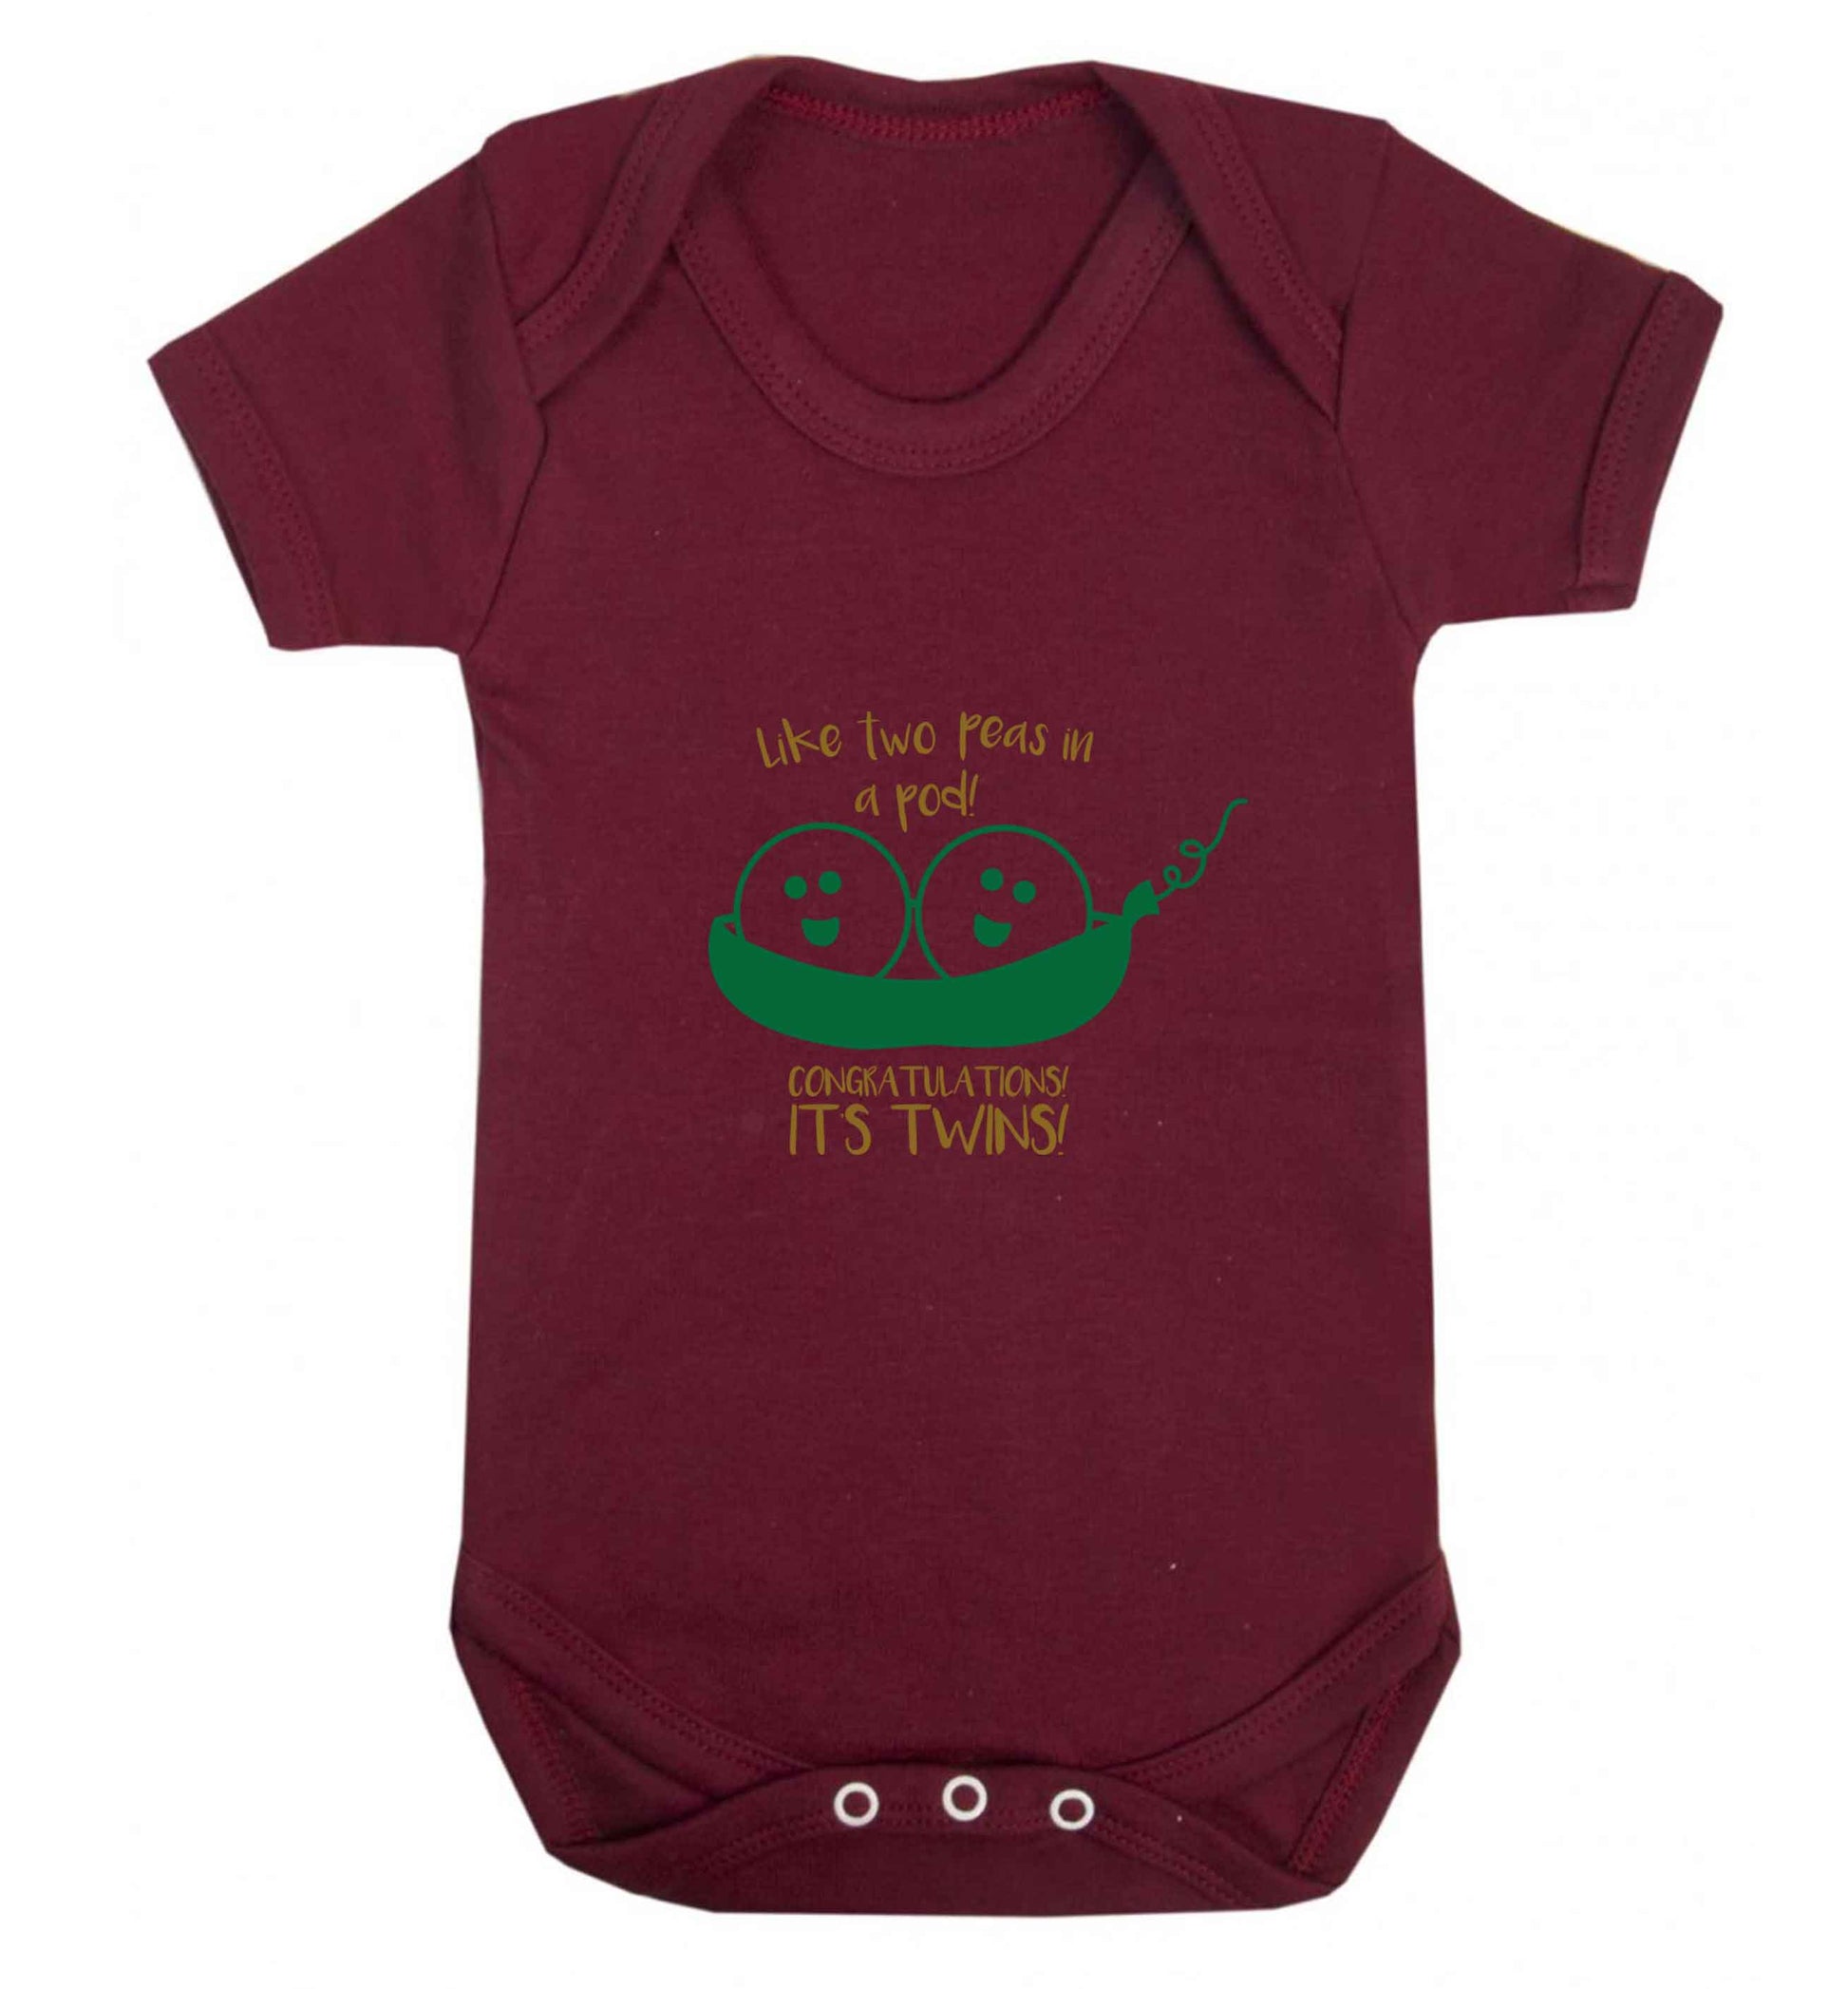 Like two peas in a pod! Congratulations it's twins! baby vest maroon 18-24 months